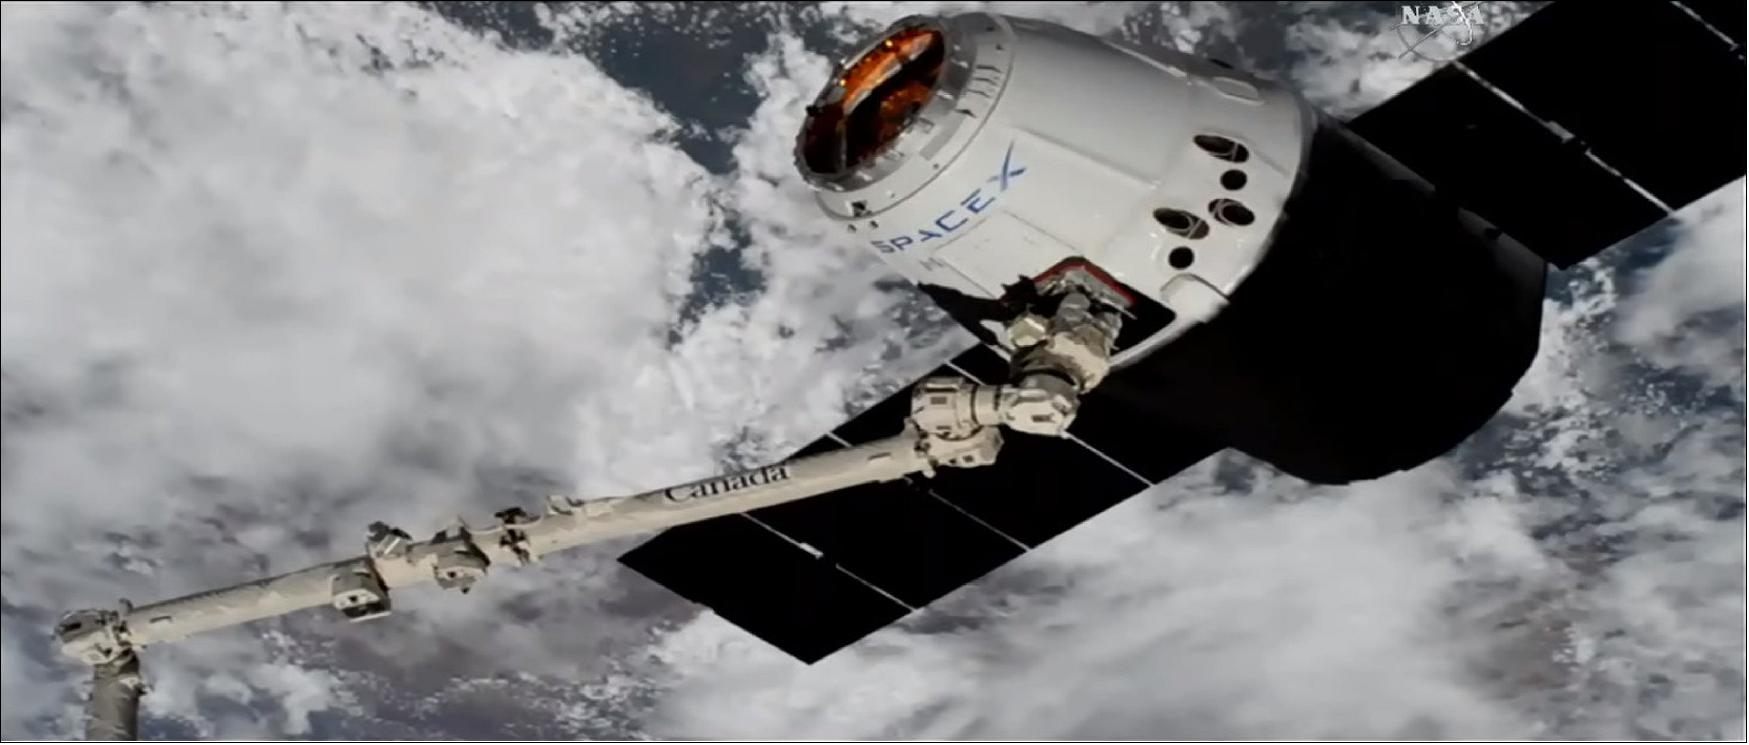 Figure 24: Astronauts aboard the ISS snagged the uncrewed Dragon today (April 4) at 10:40 GMT using the orbiting lab's huge Canadarm2 robotic arm (image credit: NASA TV)